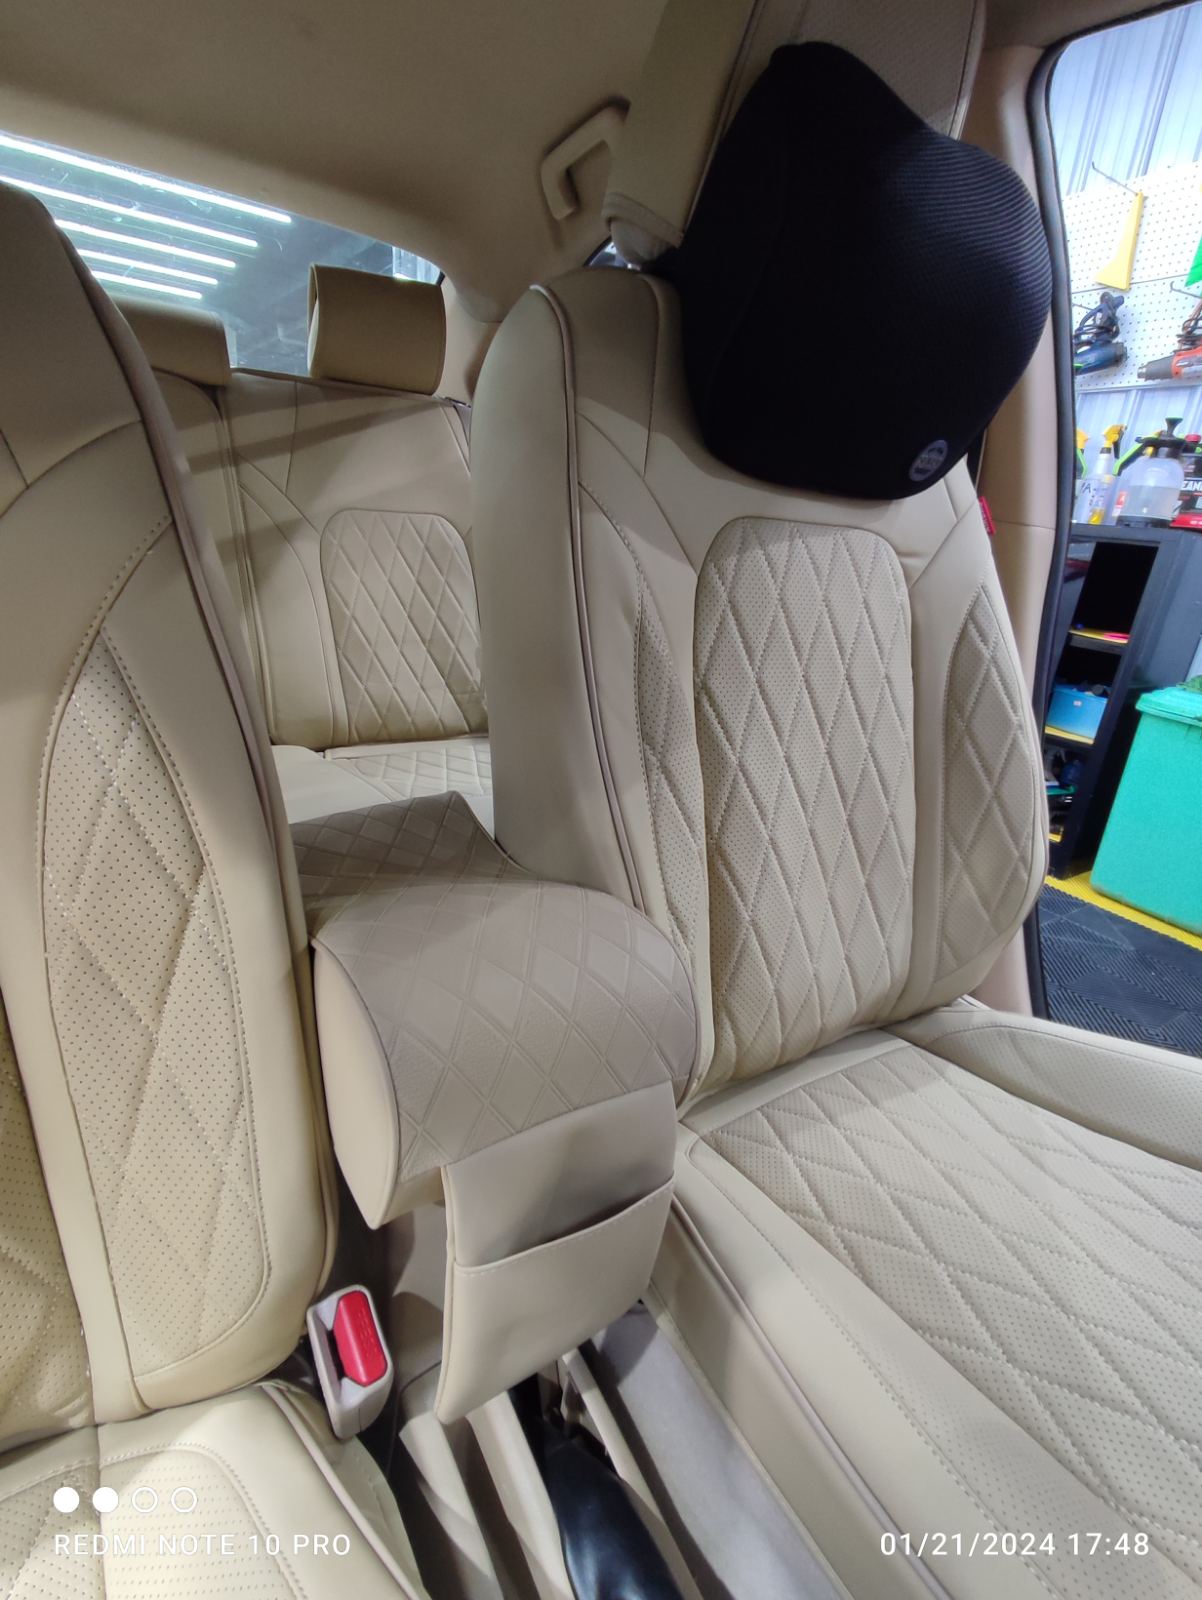 RAYMAX LUXURY SEAT COVER (H-23CX-08) (1) SET (BEIGE)